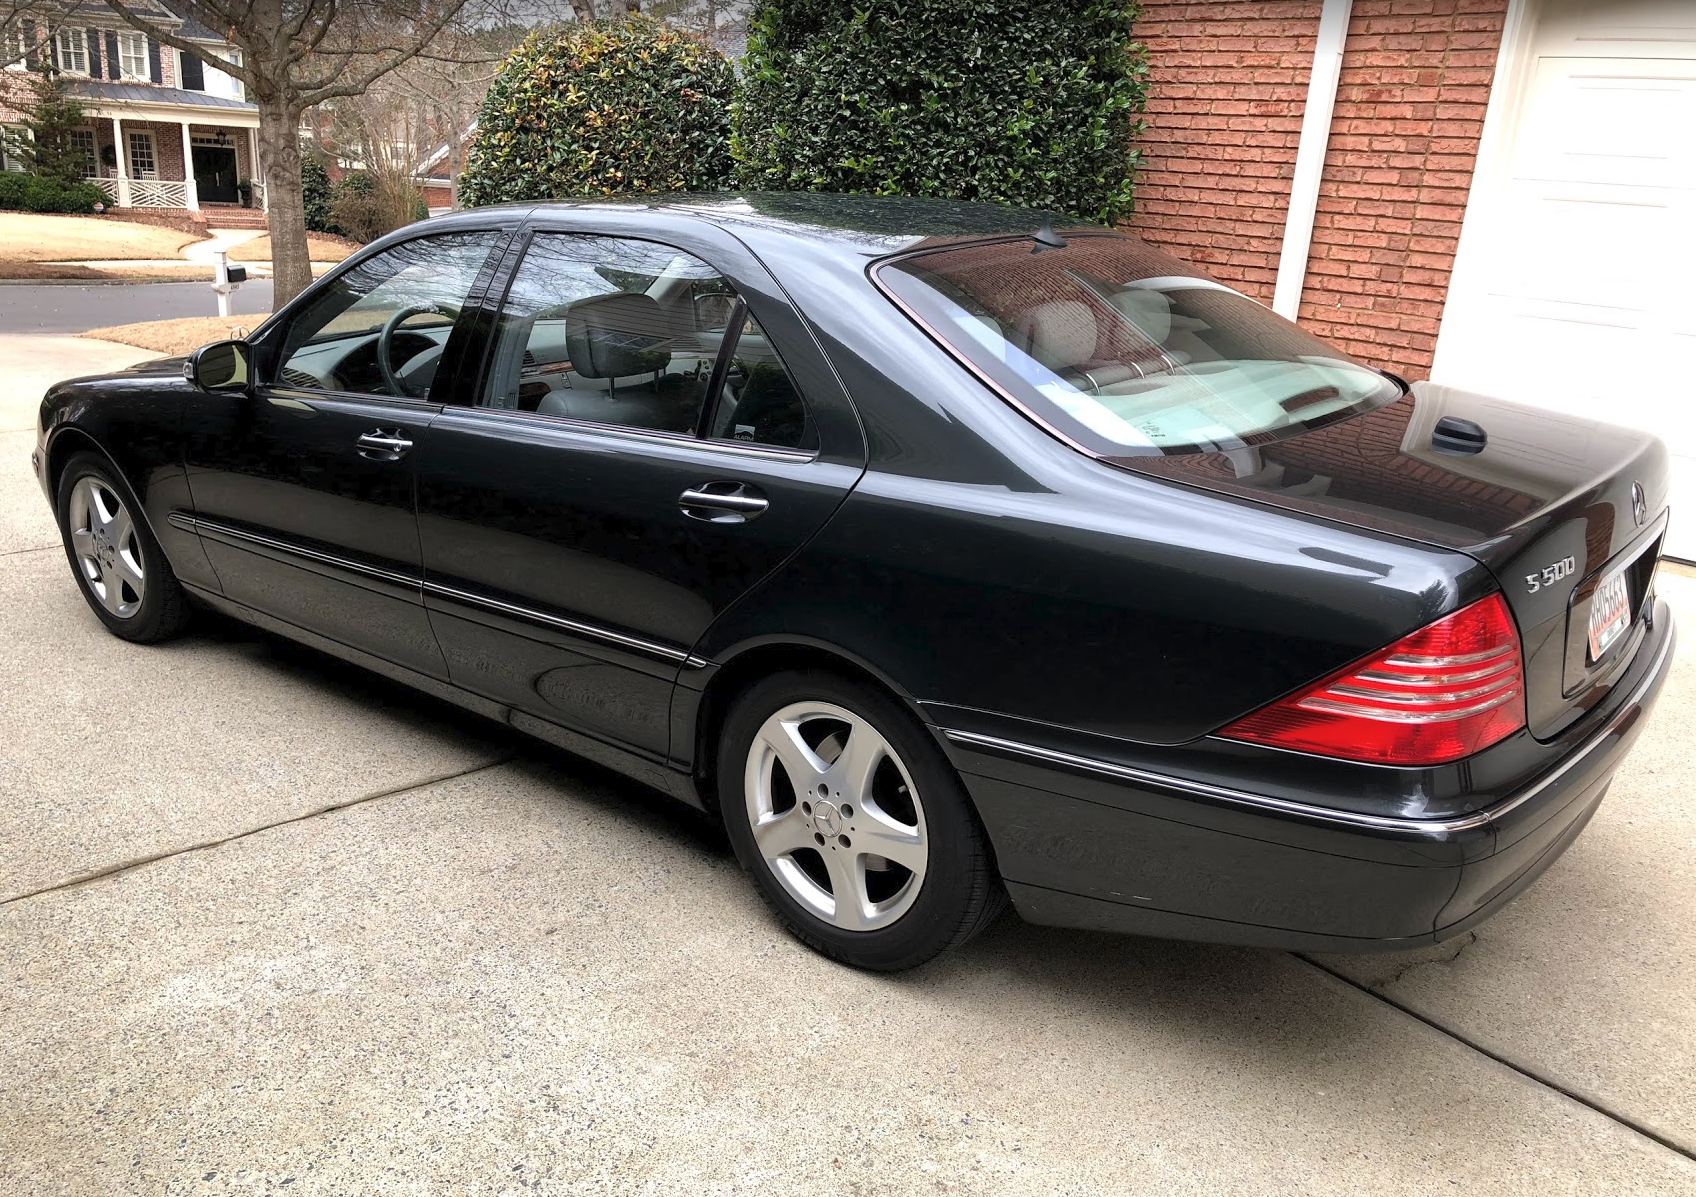 2004 Mercedes-Benz S500 - 2004 Mercedes S500 - 78k miles - Used - VIN WDBNG75J44A416319 - 78,000 Miles - 8 cyl - 2WD - Automatic - Sedan - Gray - Suwanee, GA 30024, United States